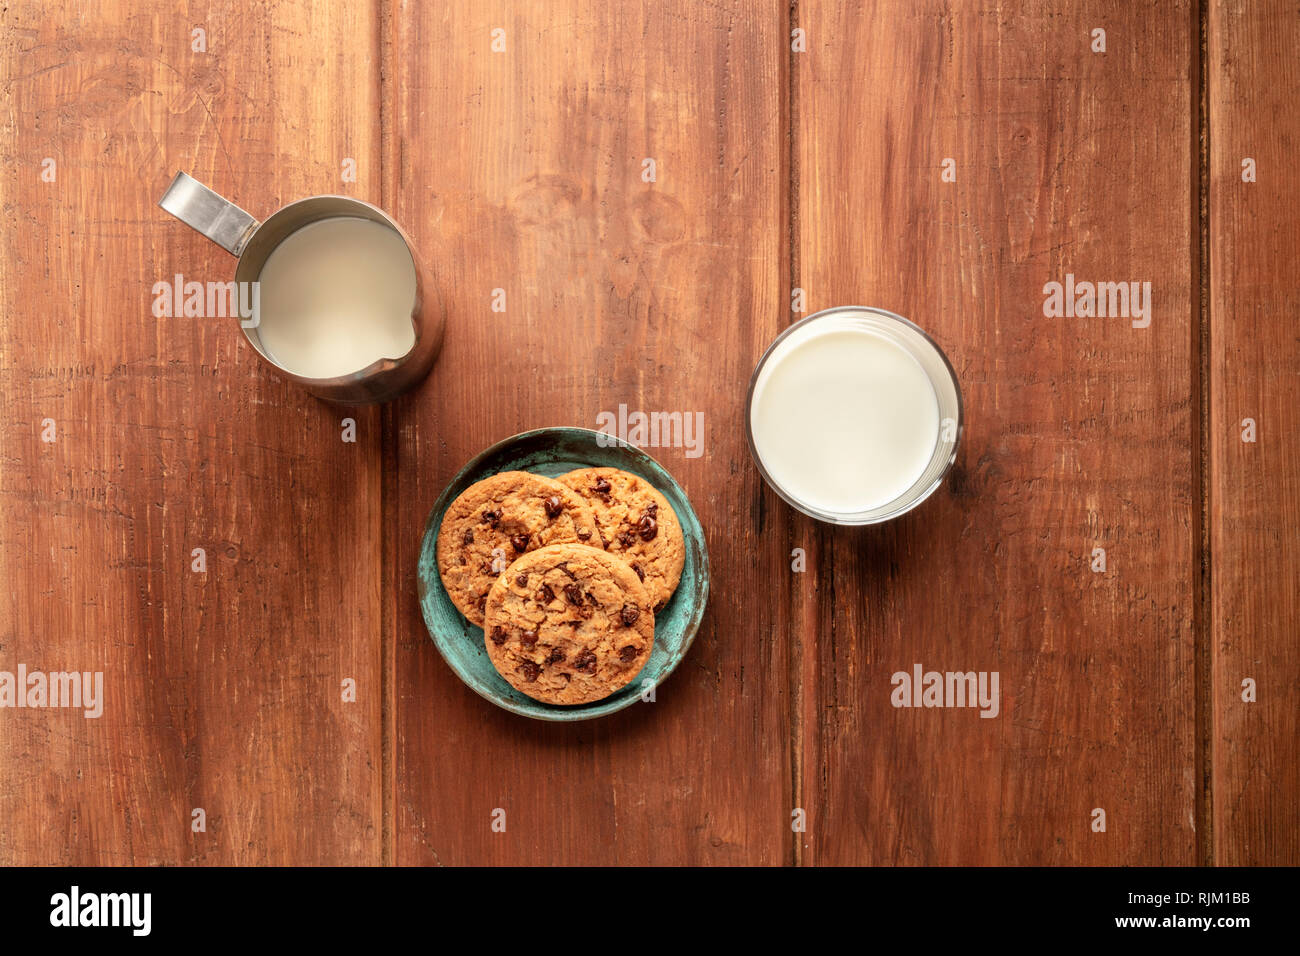 Chocolate chip cookies on a dark rustic wooden background, shot from the top with a milk jug and glass and copy space Stock Photo